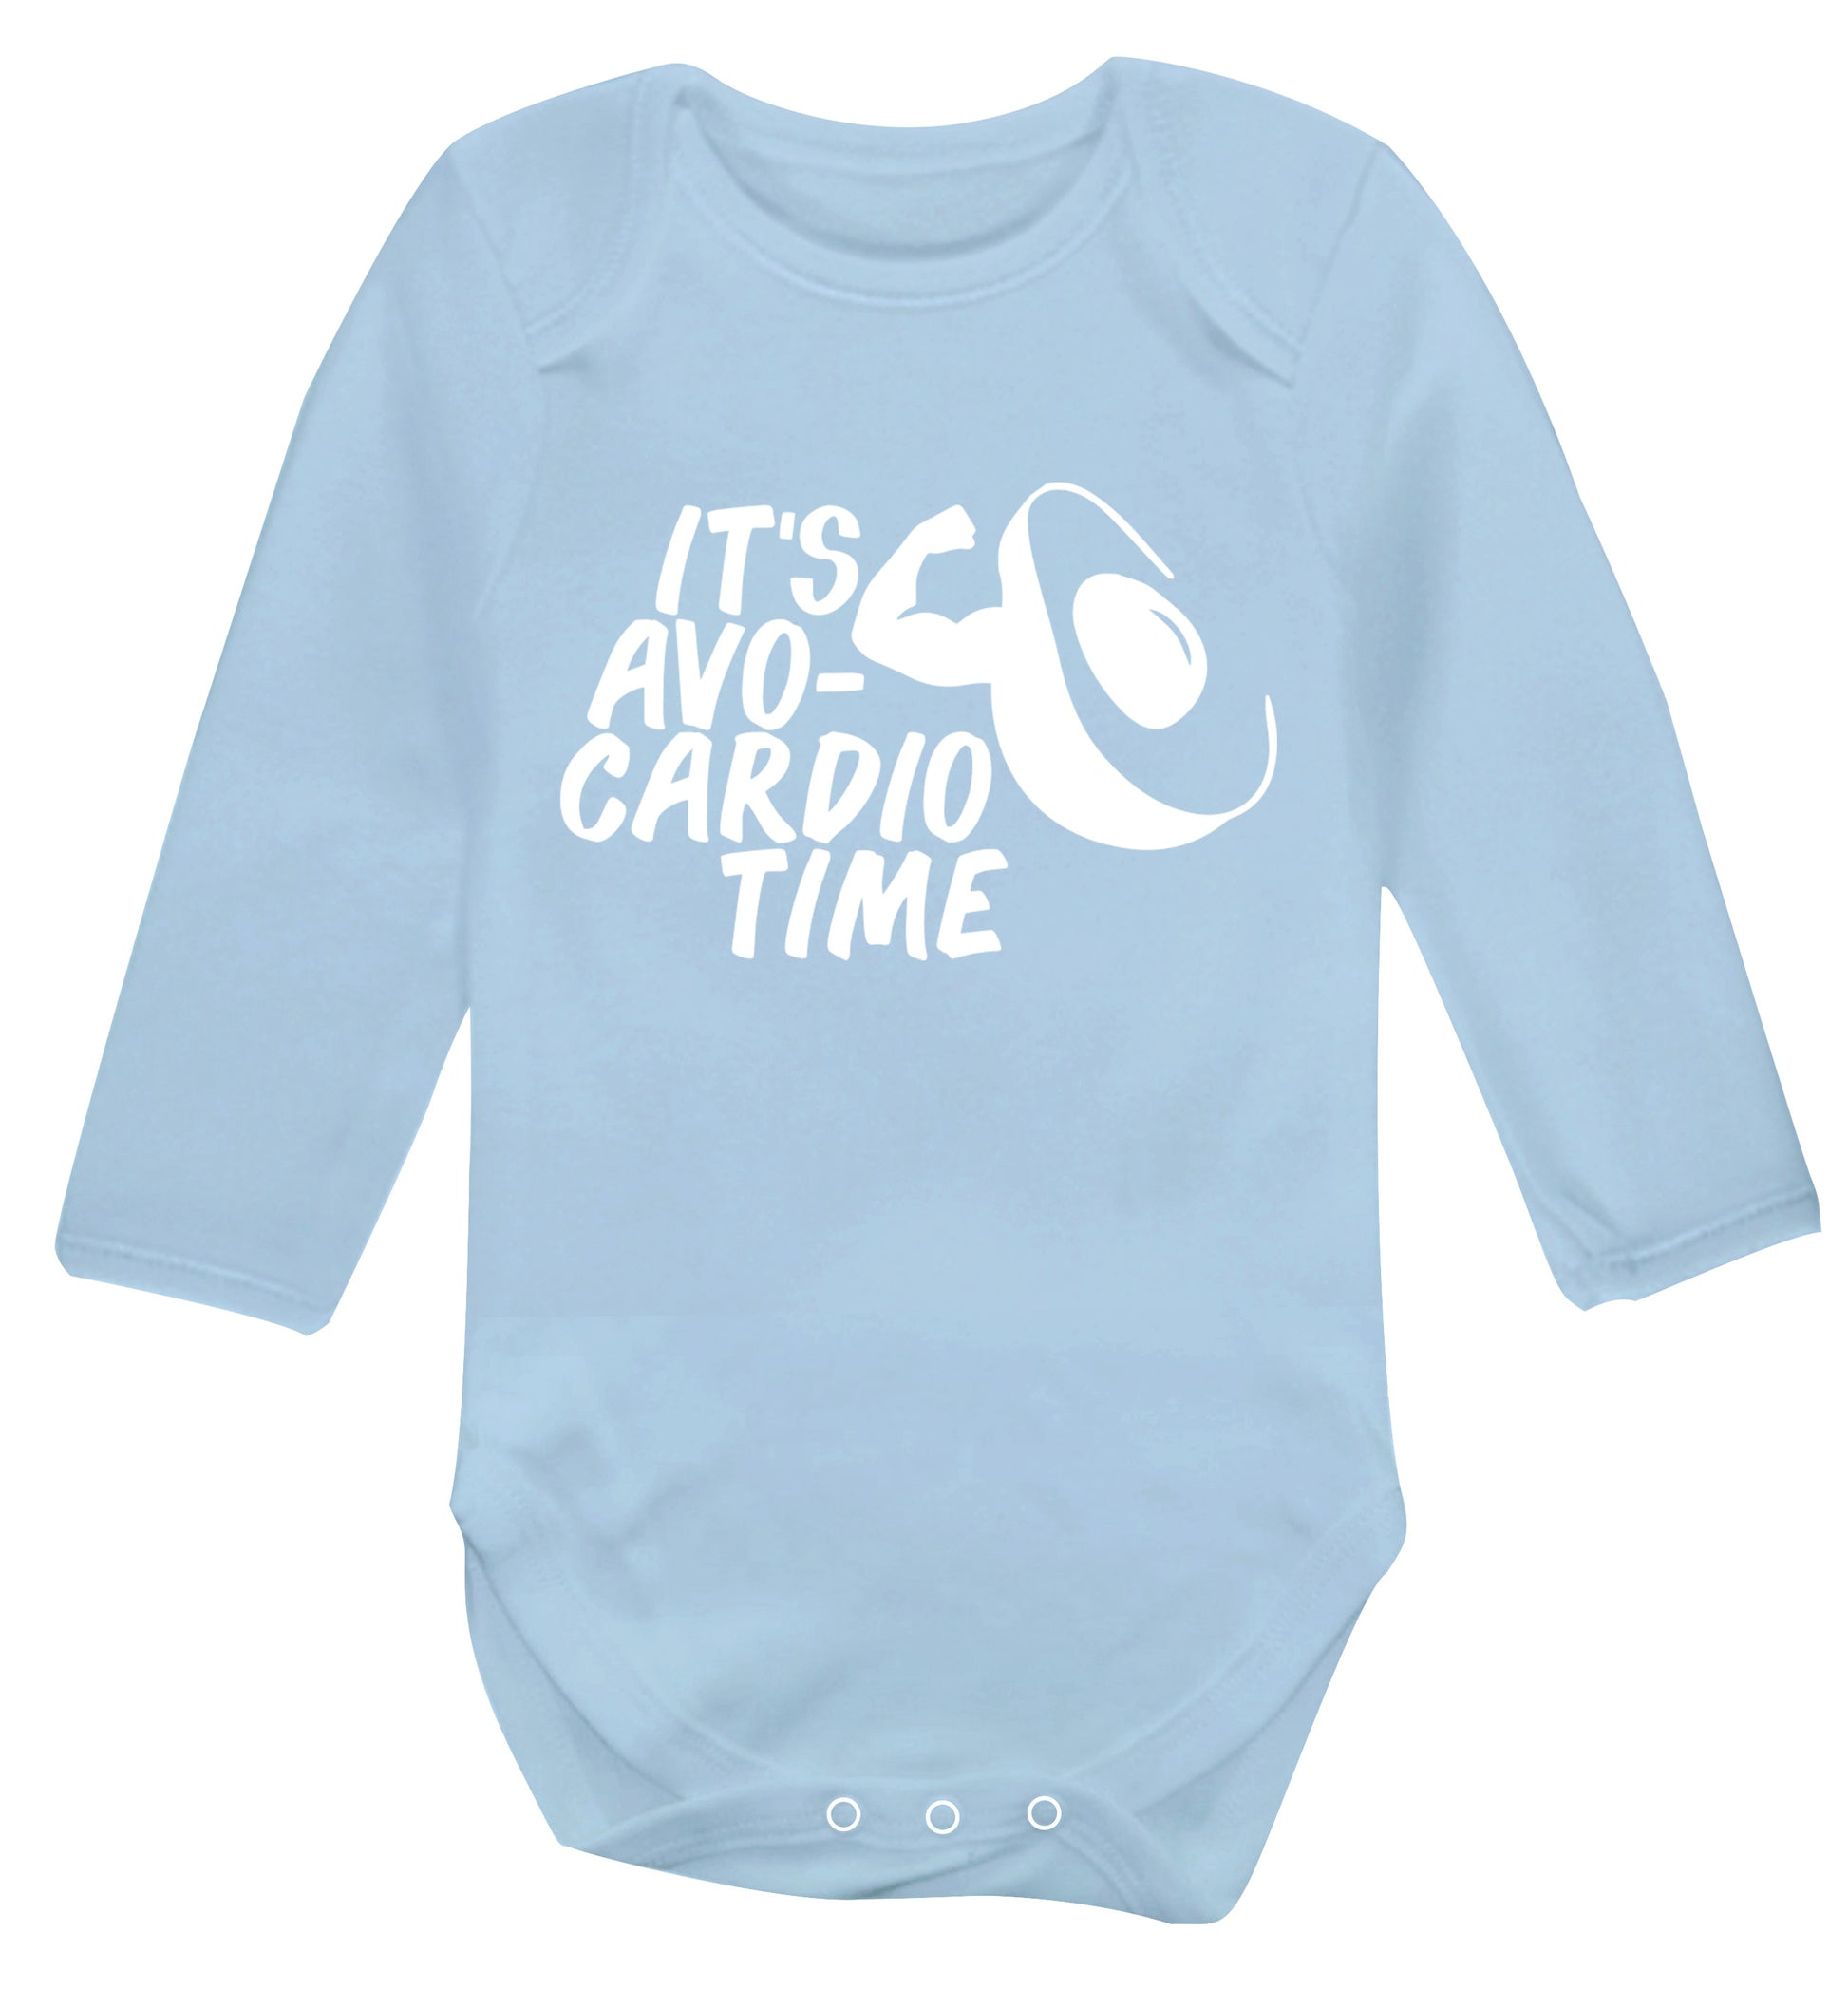 It's avo-cardio time Baby Vest long sleeved pale blue 6-12 months